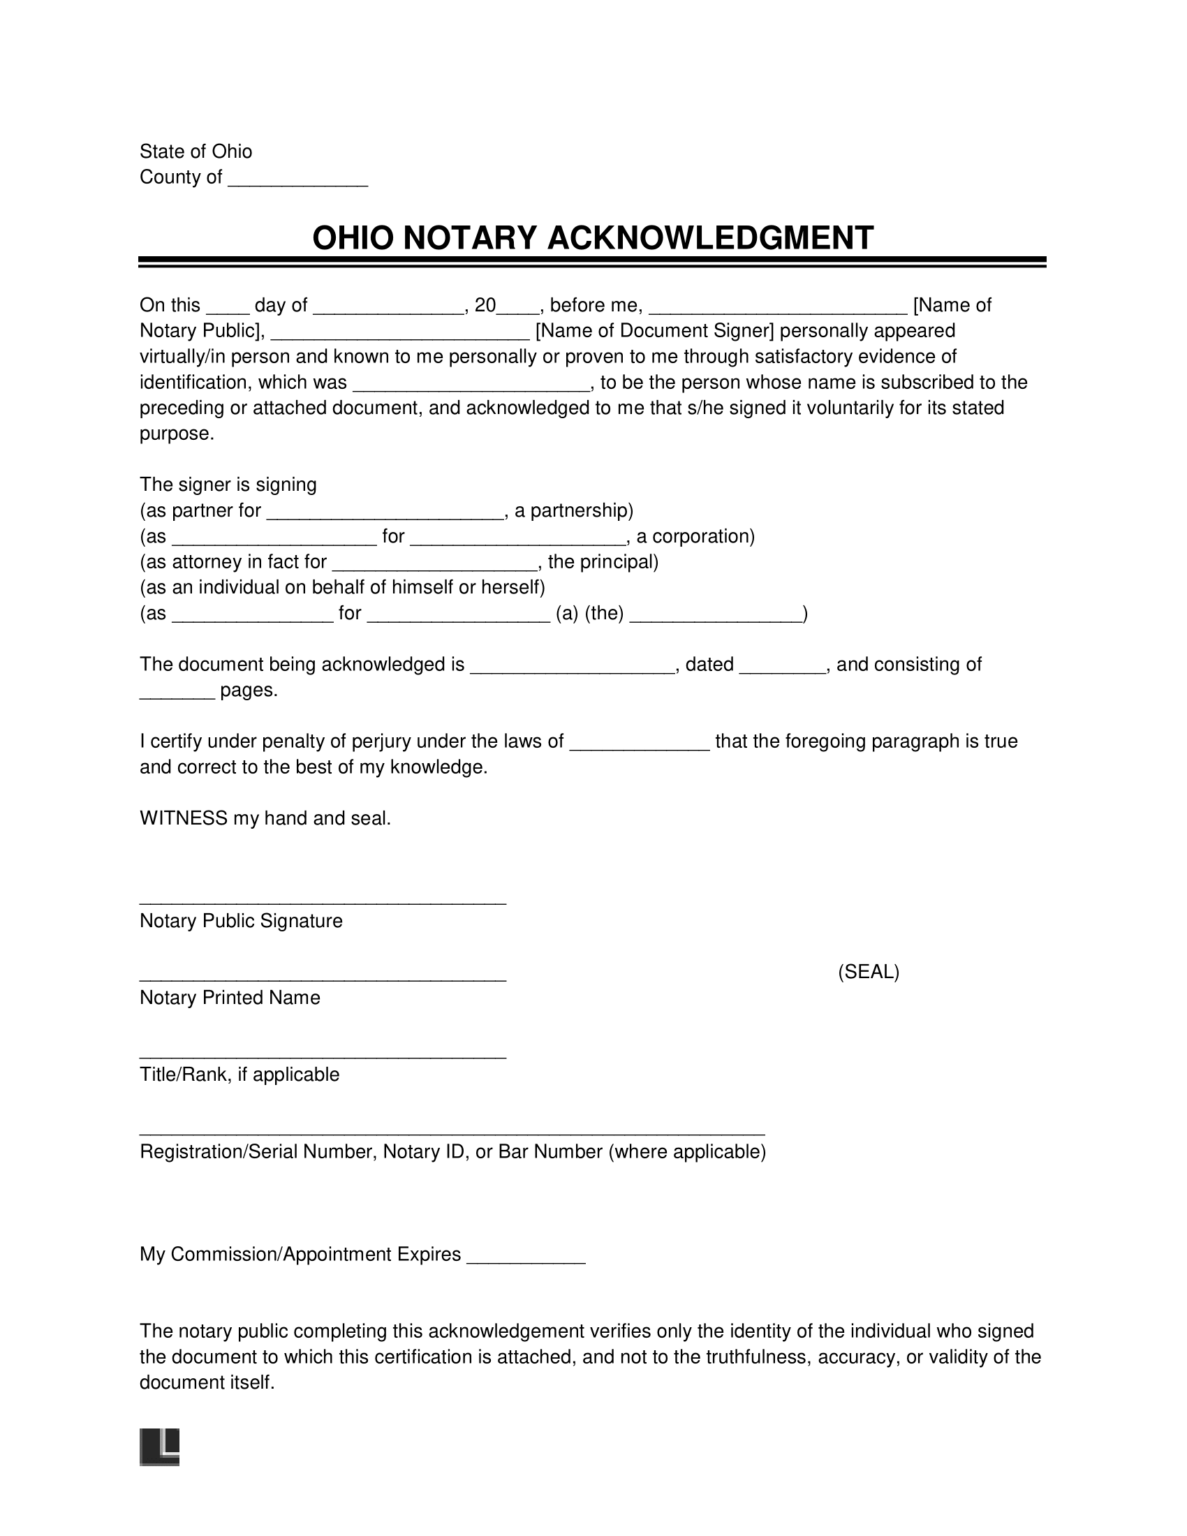 Free Ohio Notary Acknowledgment Form Pdf And Word 8103